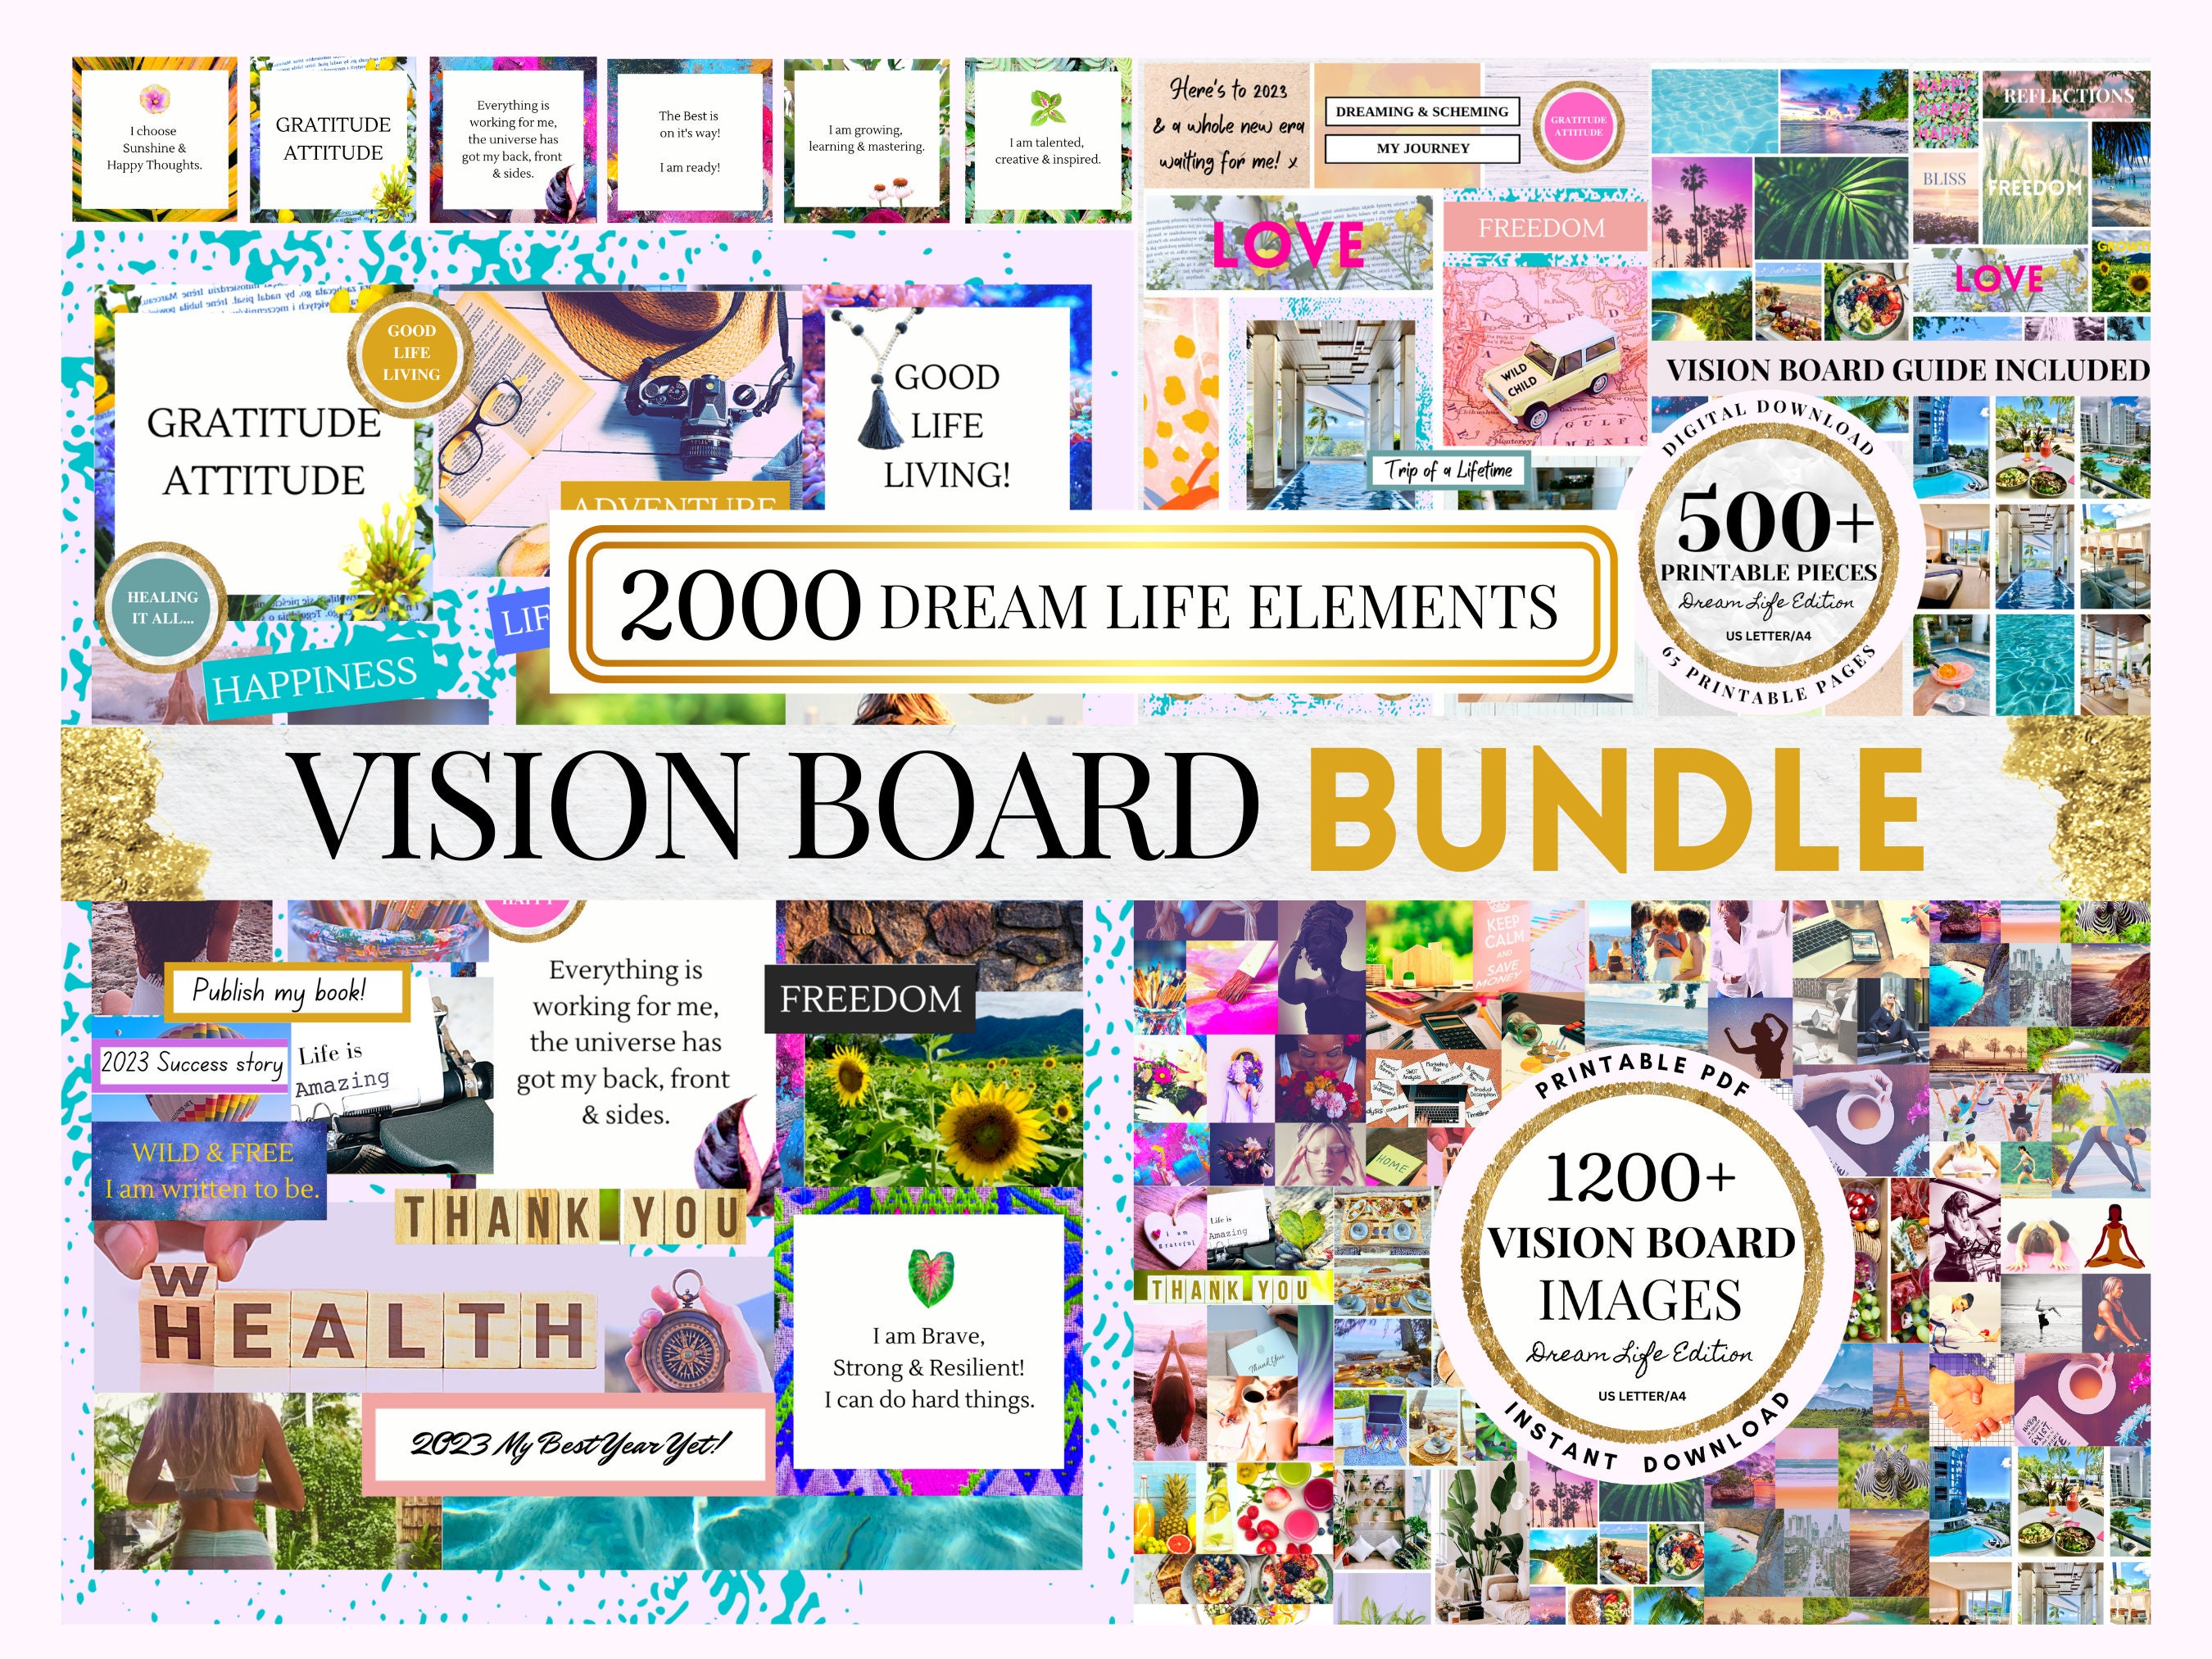 Dry Erase Vision Board - Framed Dream Vision Board Wall Planner with  Beautiful Watercolor Content Blocks – Use Goal Board Section to Track  Goals! This Personal Whiteboard Planner is 17.5x21 : Buy